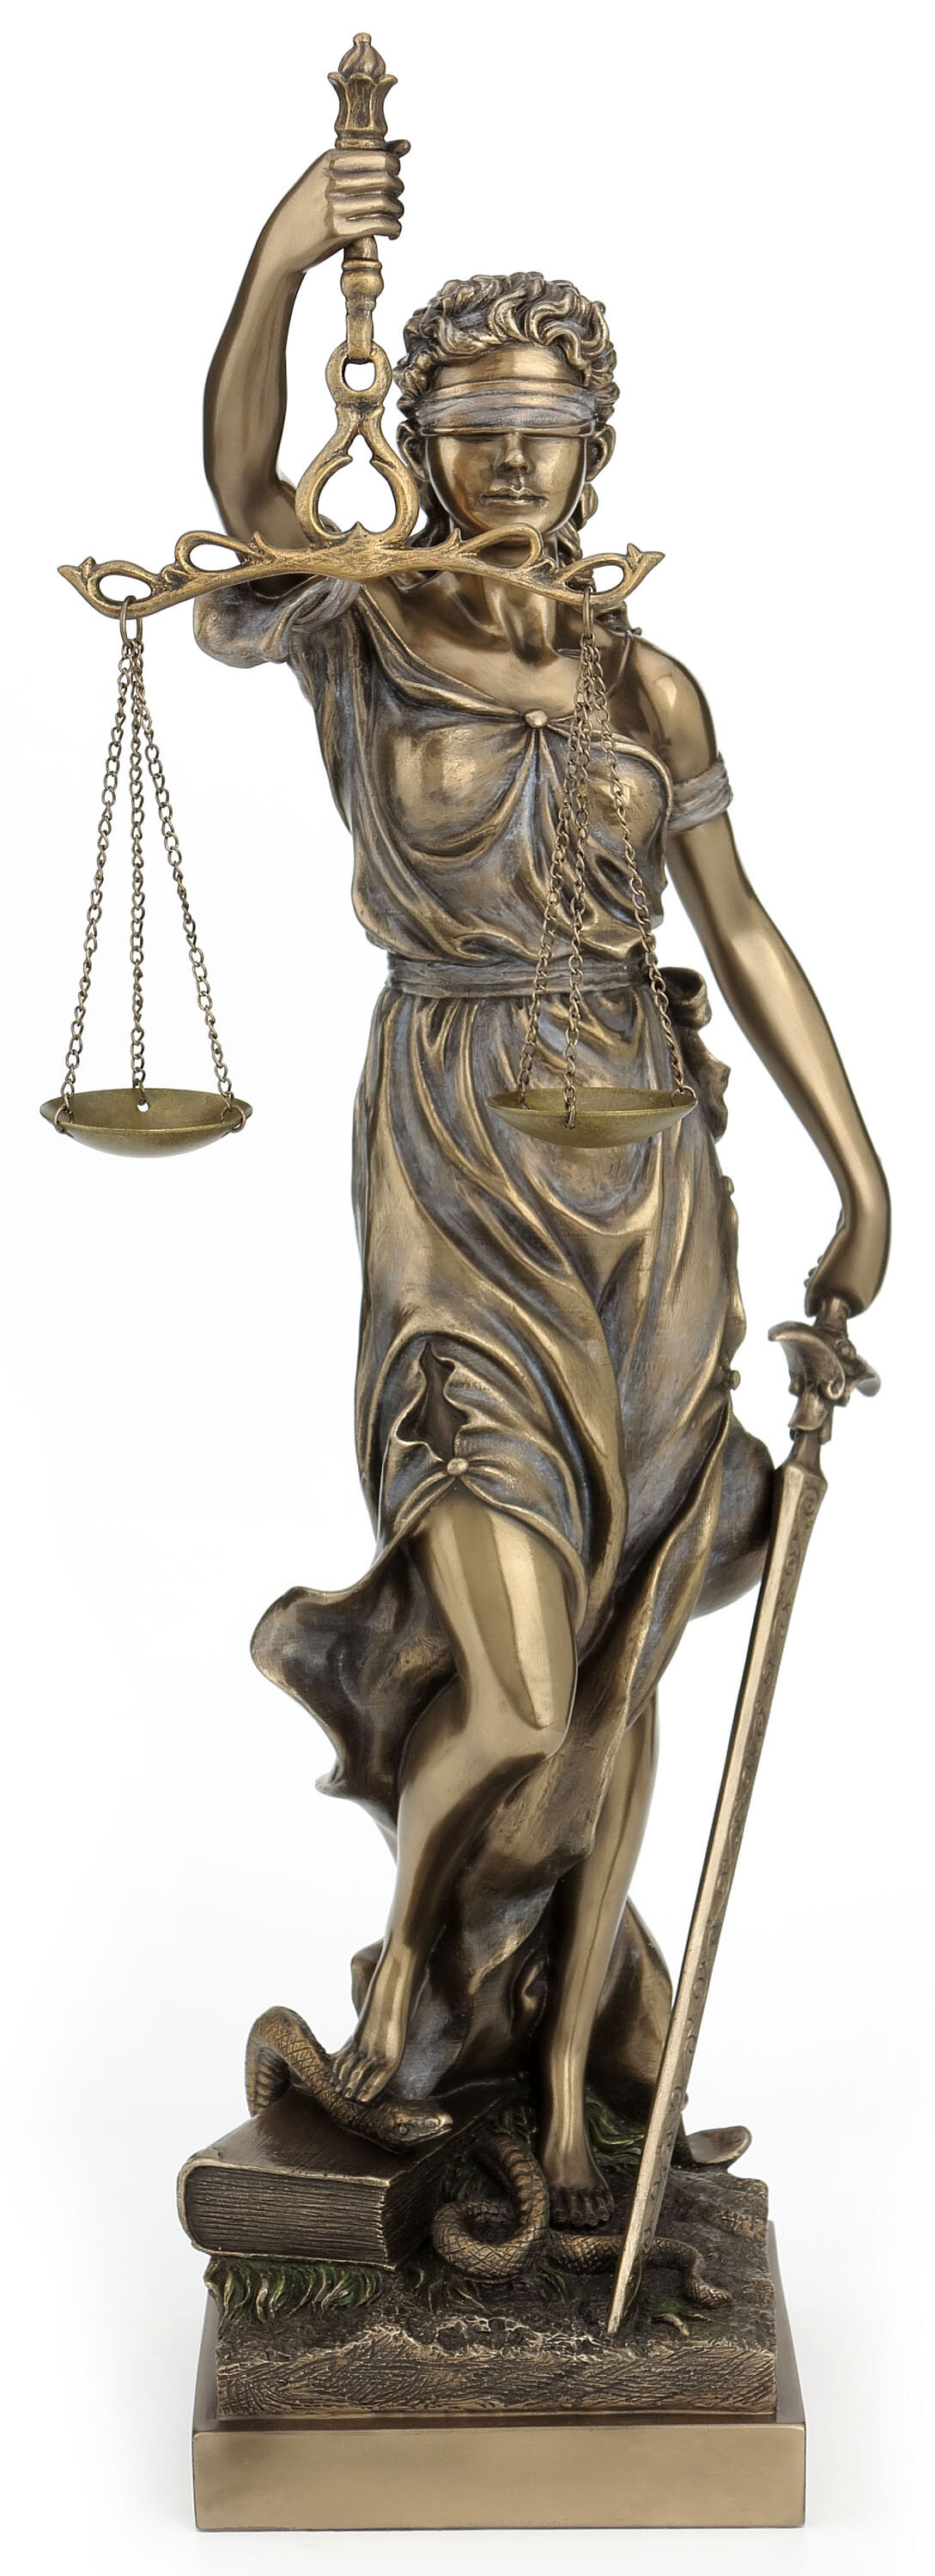 Blind Lady Scales of Justice Lawyer Attorney Judge Figurine Statue Sculpture 